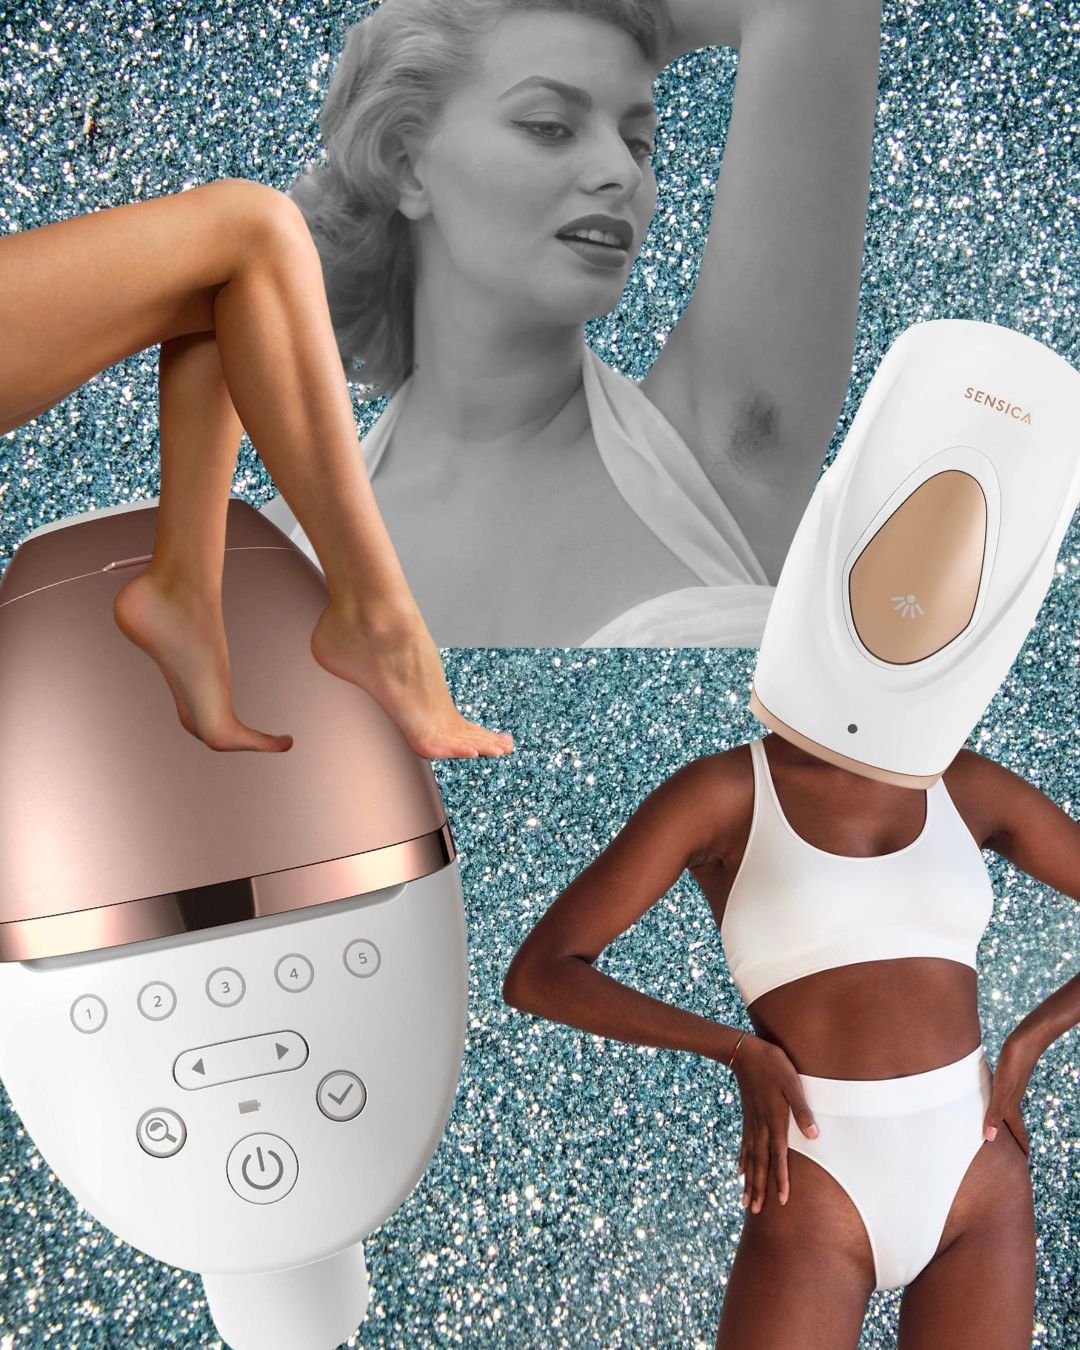 The Top 5 At-Home Laser Hair Removal Devices: A Comprehensive